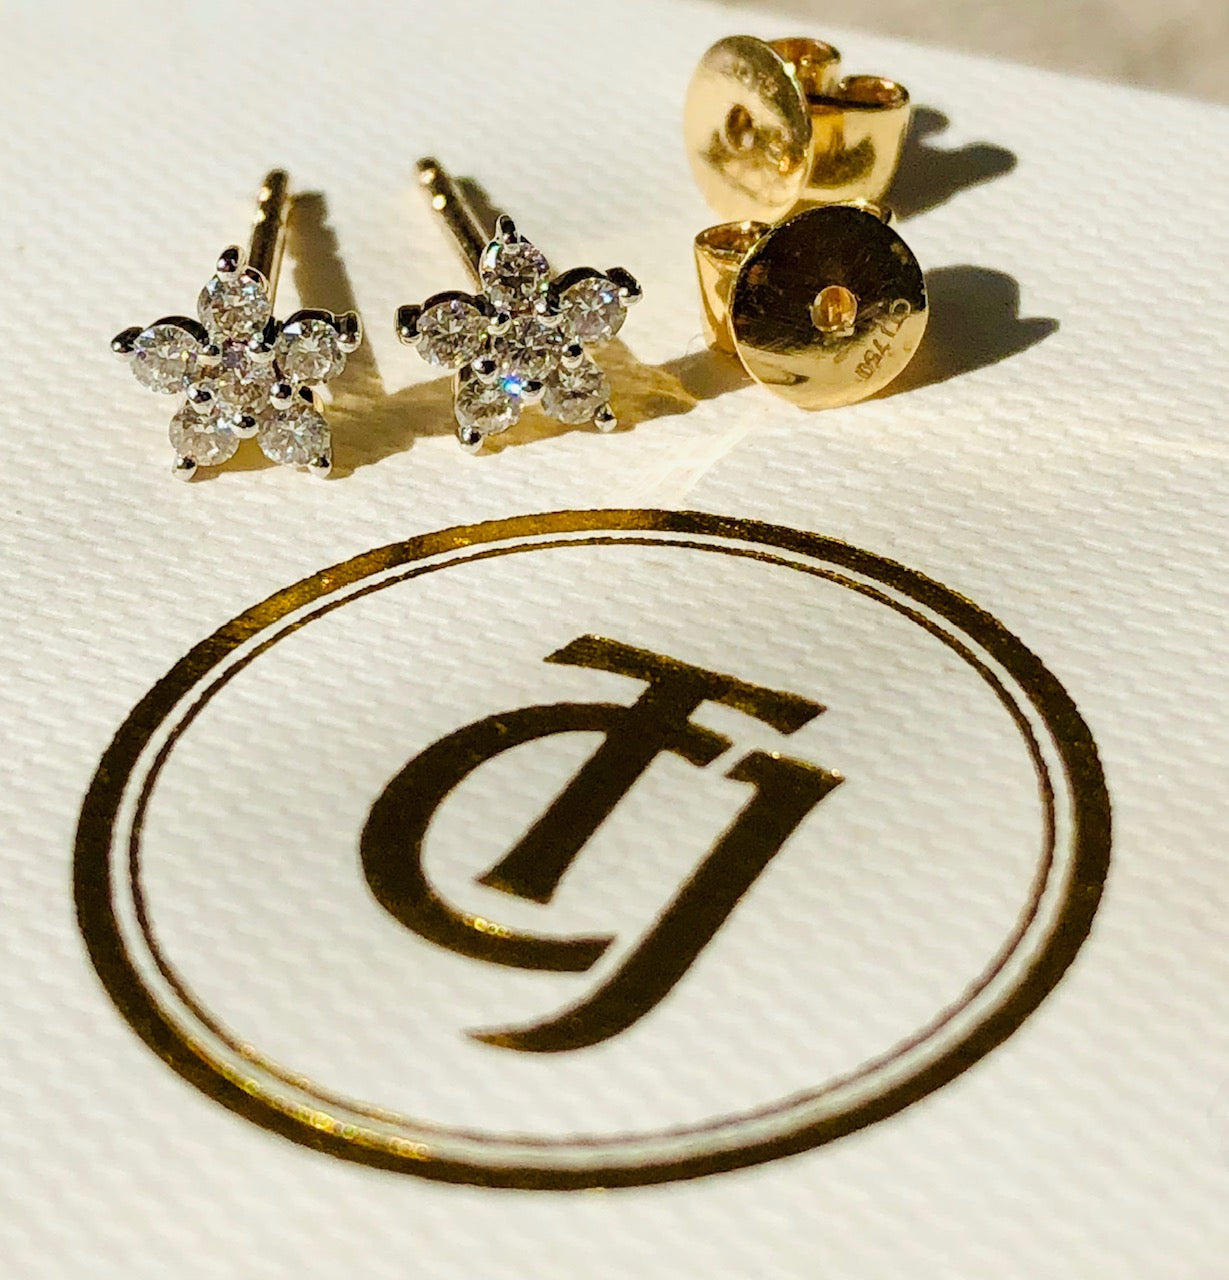 0.28tcw G/SI1 Genuine Diamond 'Star Bright' Earrings 18ct 18k Solid Yellow Gold